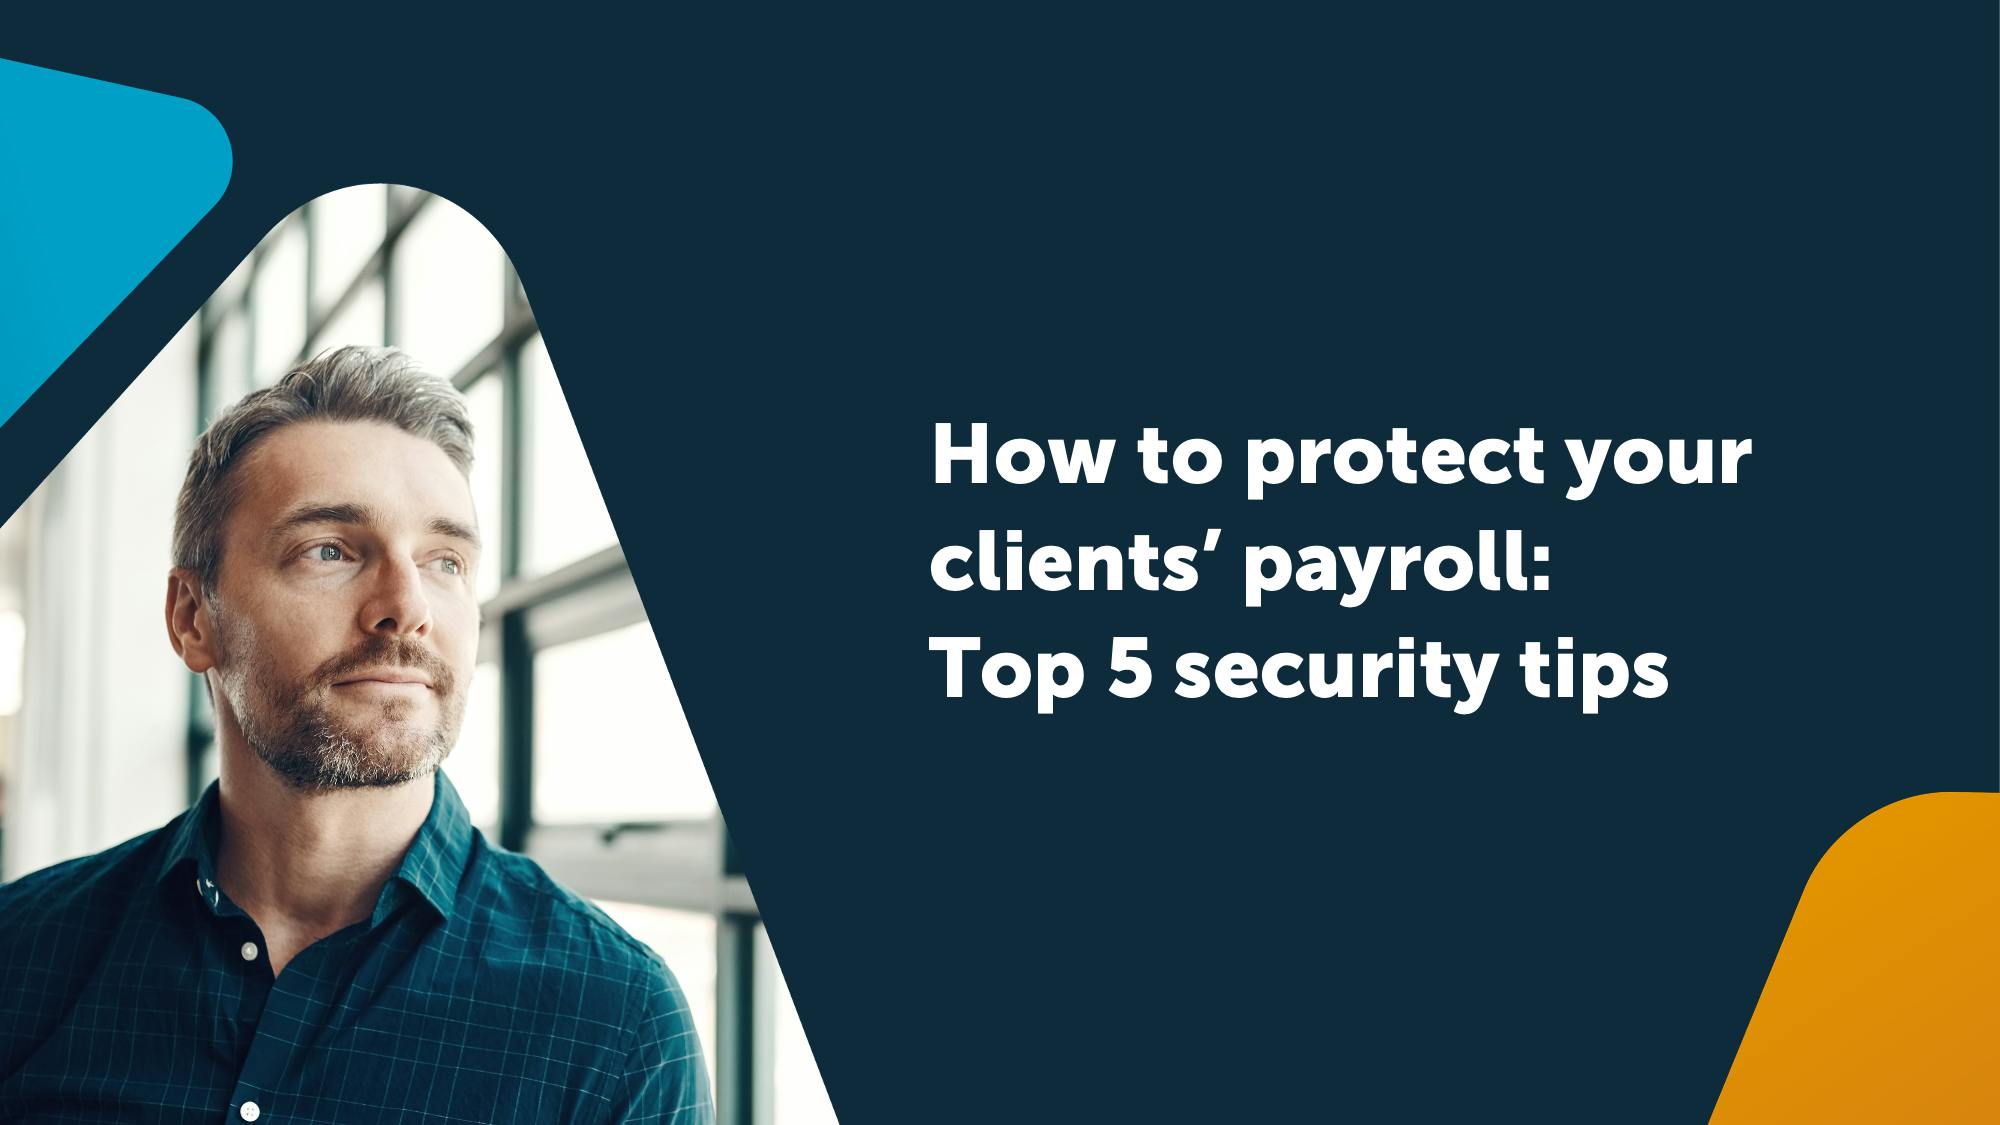 How to protect your clients’ payroll: Top 5 security tips